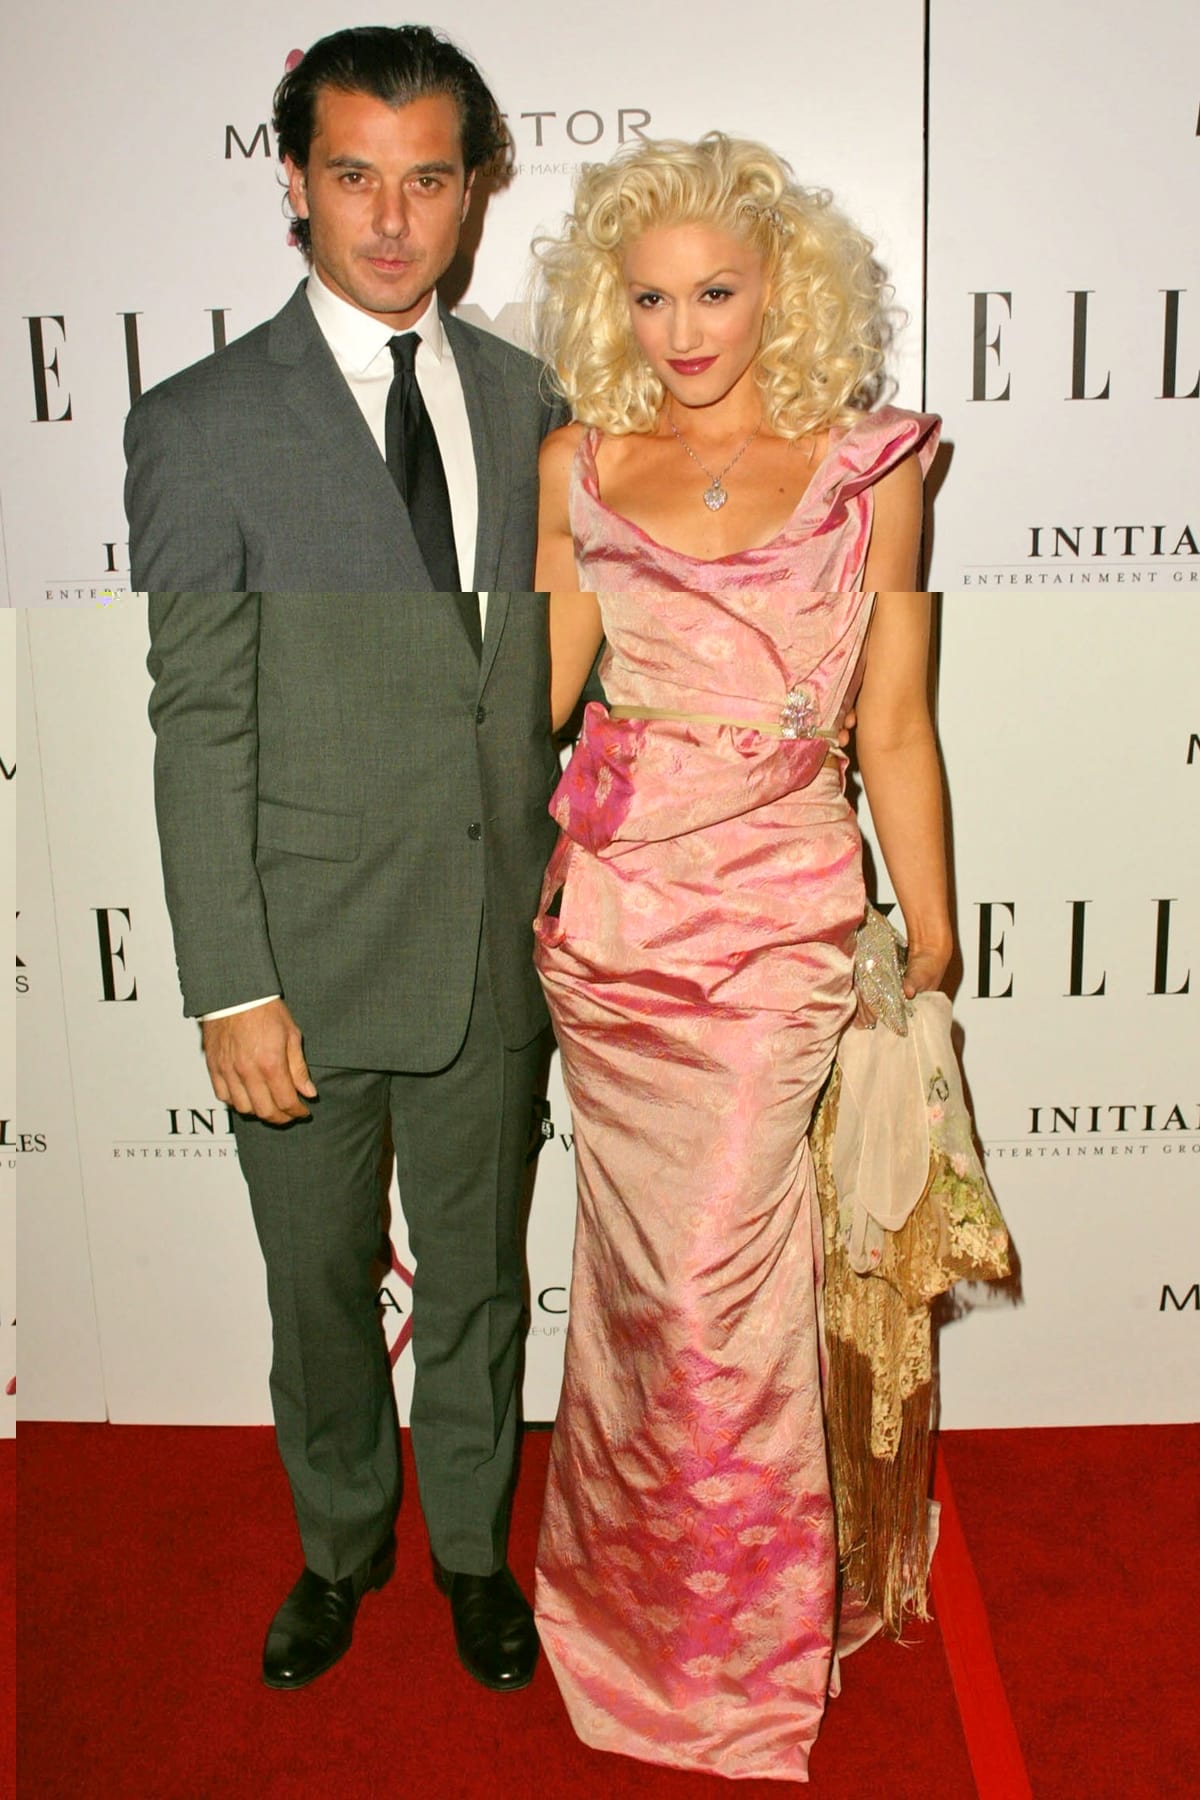 Gavin Rossdale and Gwen Stefani at the premiere of The Aviator